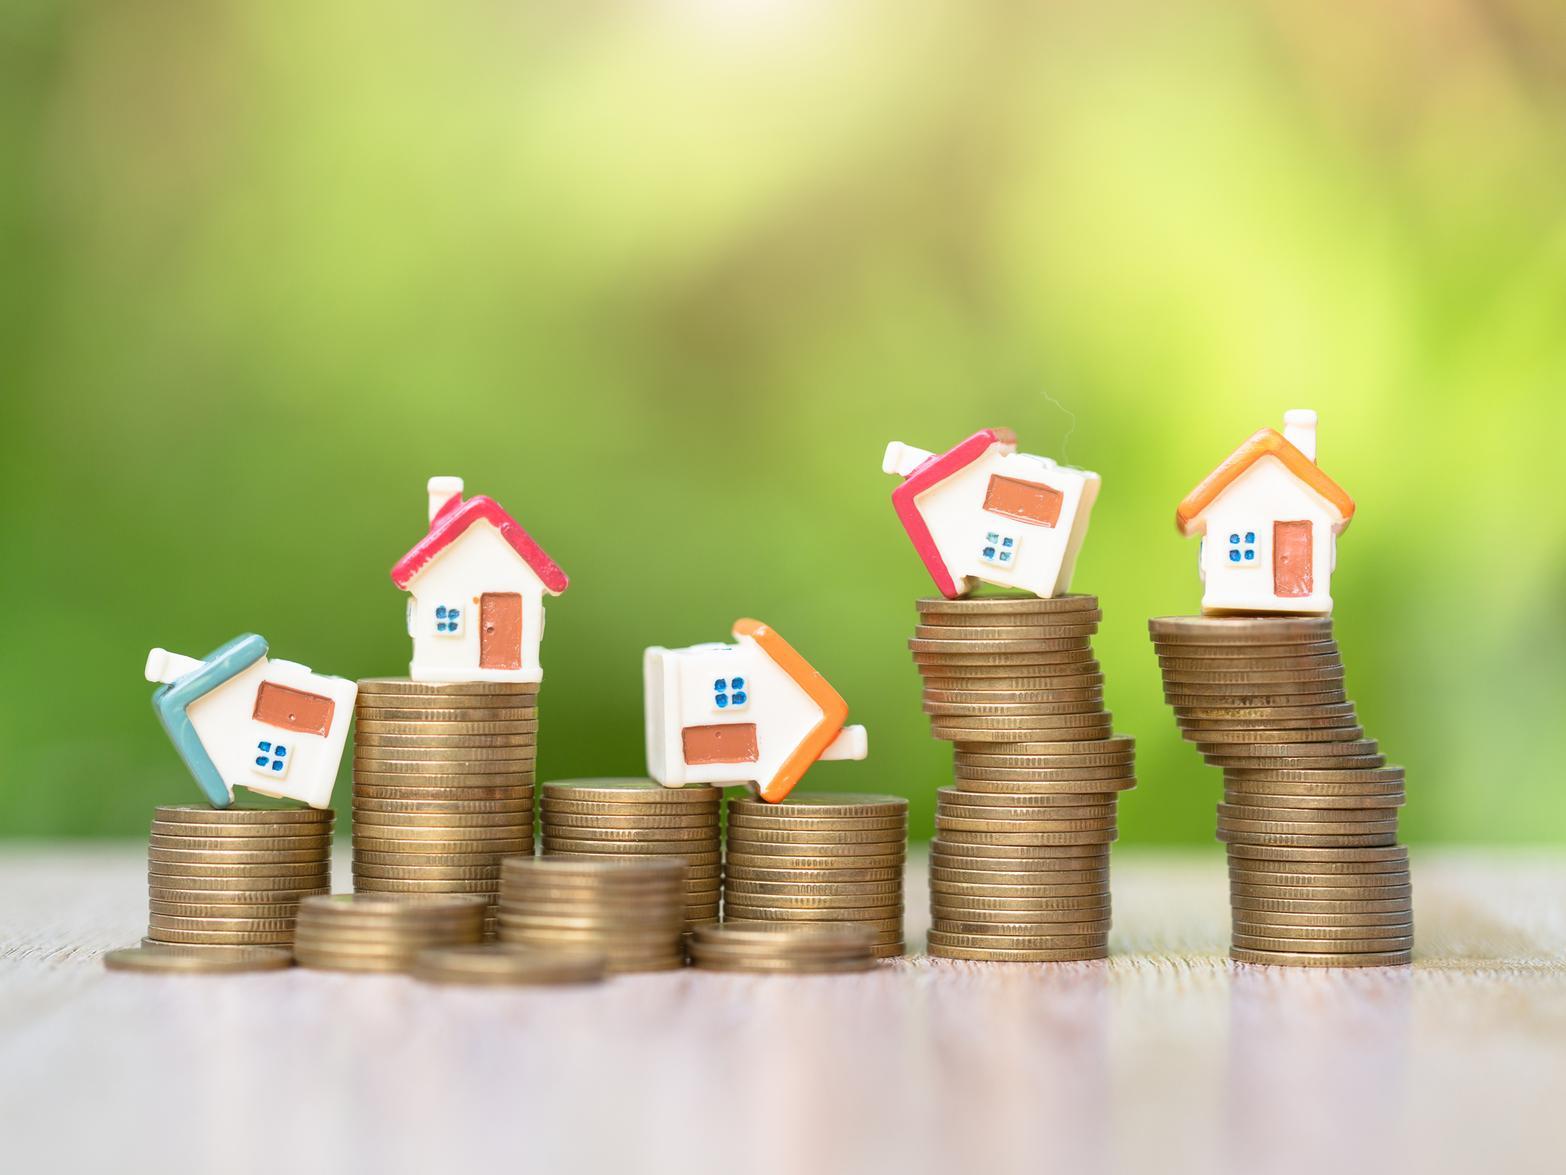 If youre looking to buy a new property, or just looking around to see whats on offer, then you may be interested to see how property prices vary around the area.